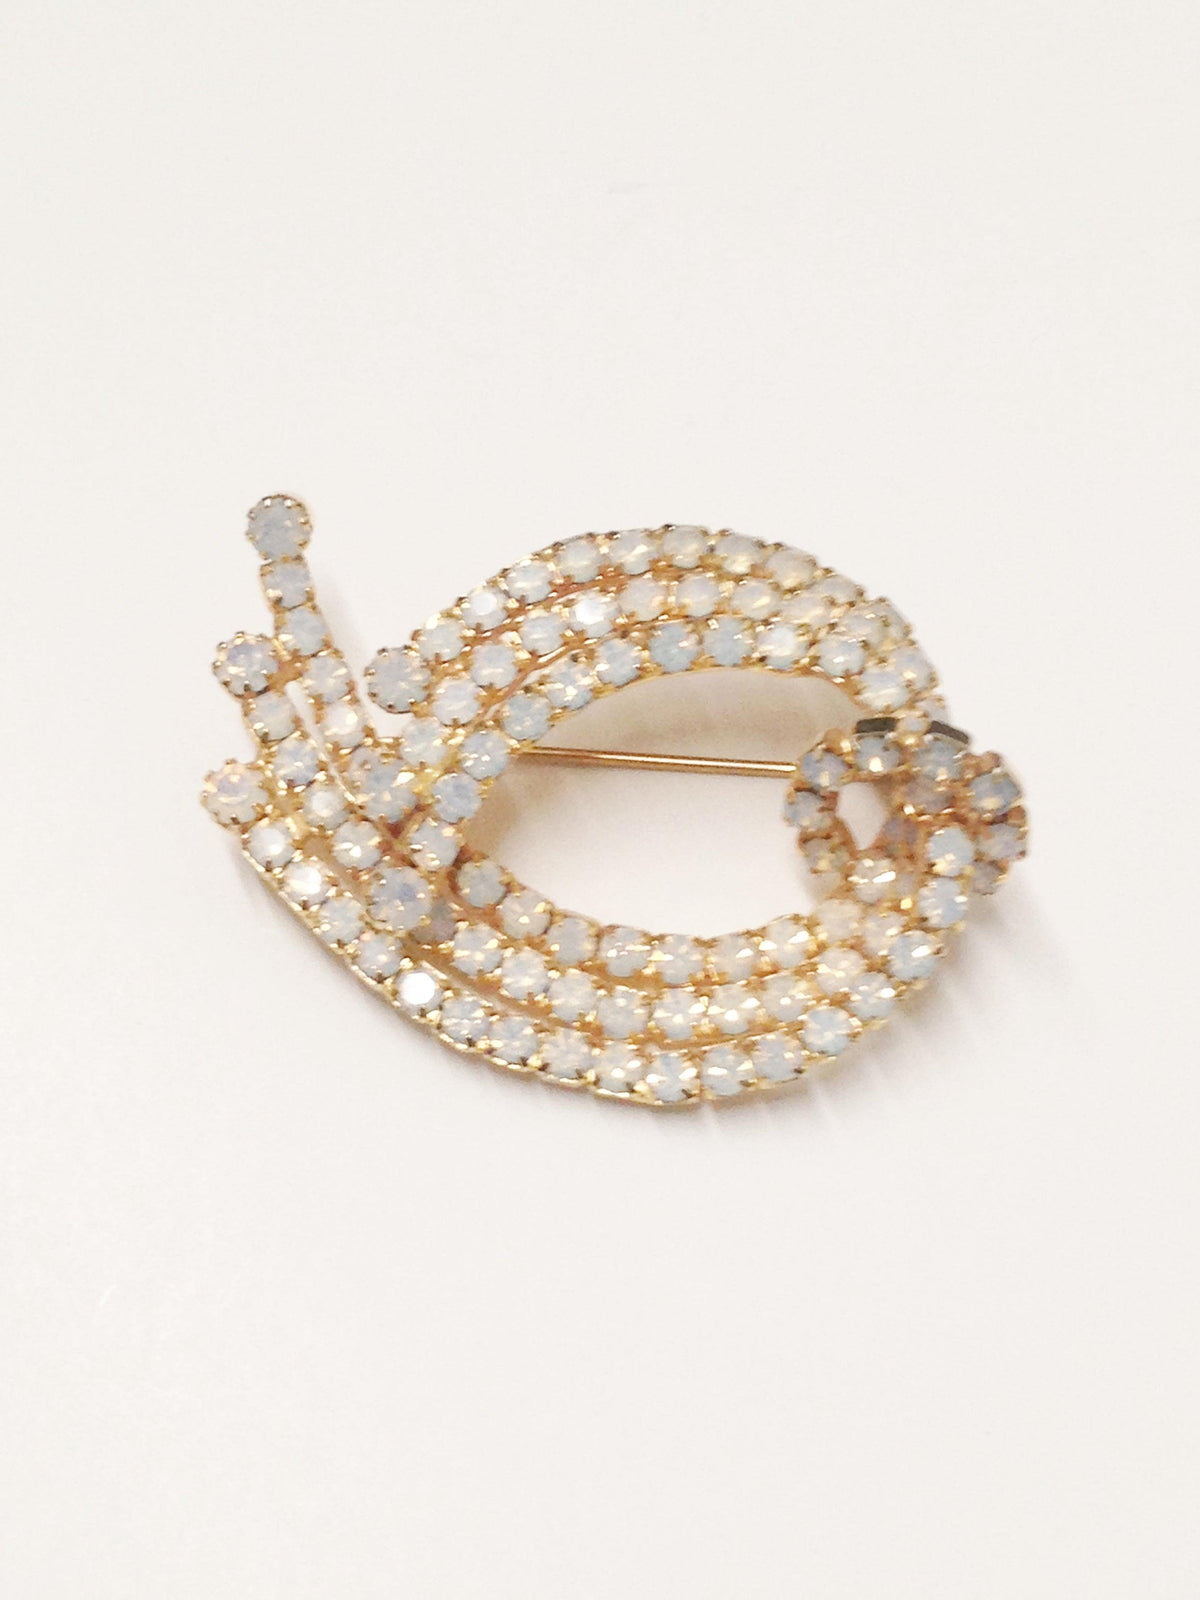 Vintage Opaque White Rhinestone Brooch Pin - Hers and His Treasures